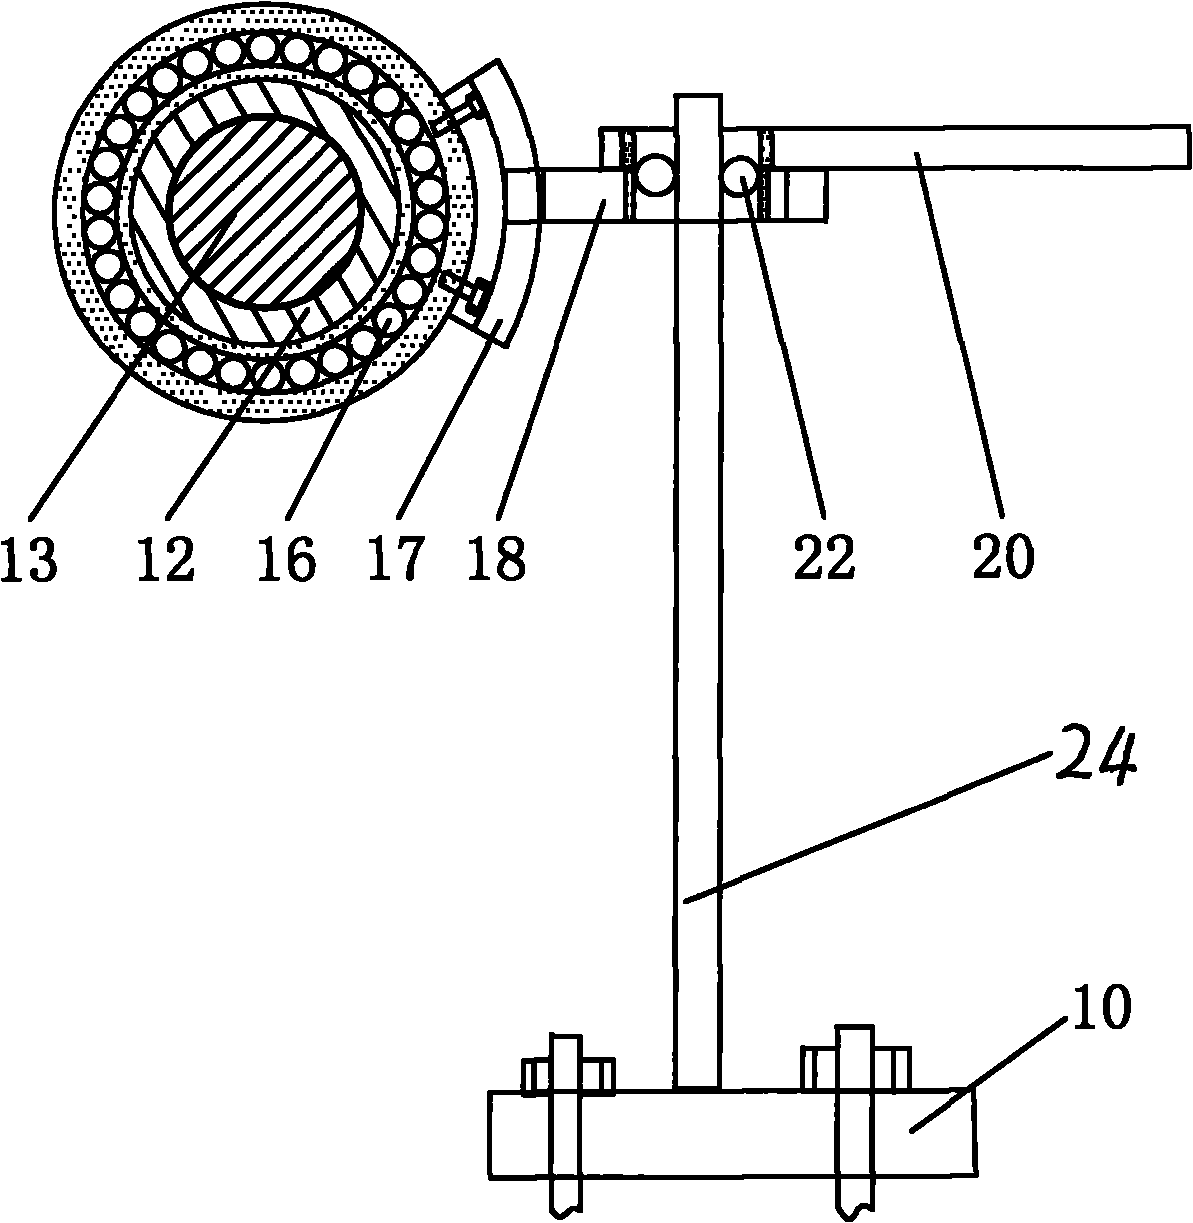 Permanent-magnetic speed regulation driving system